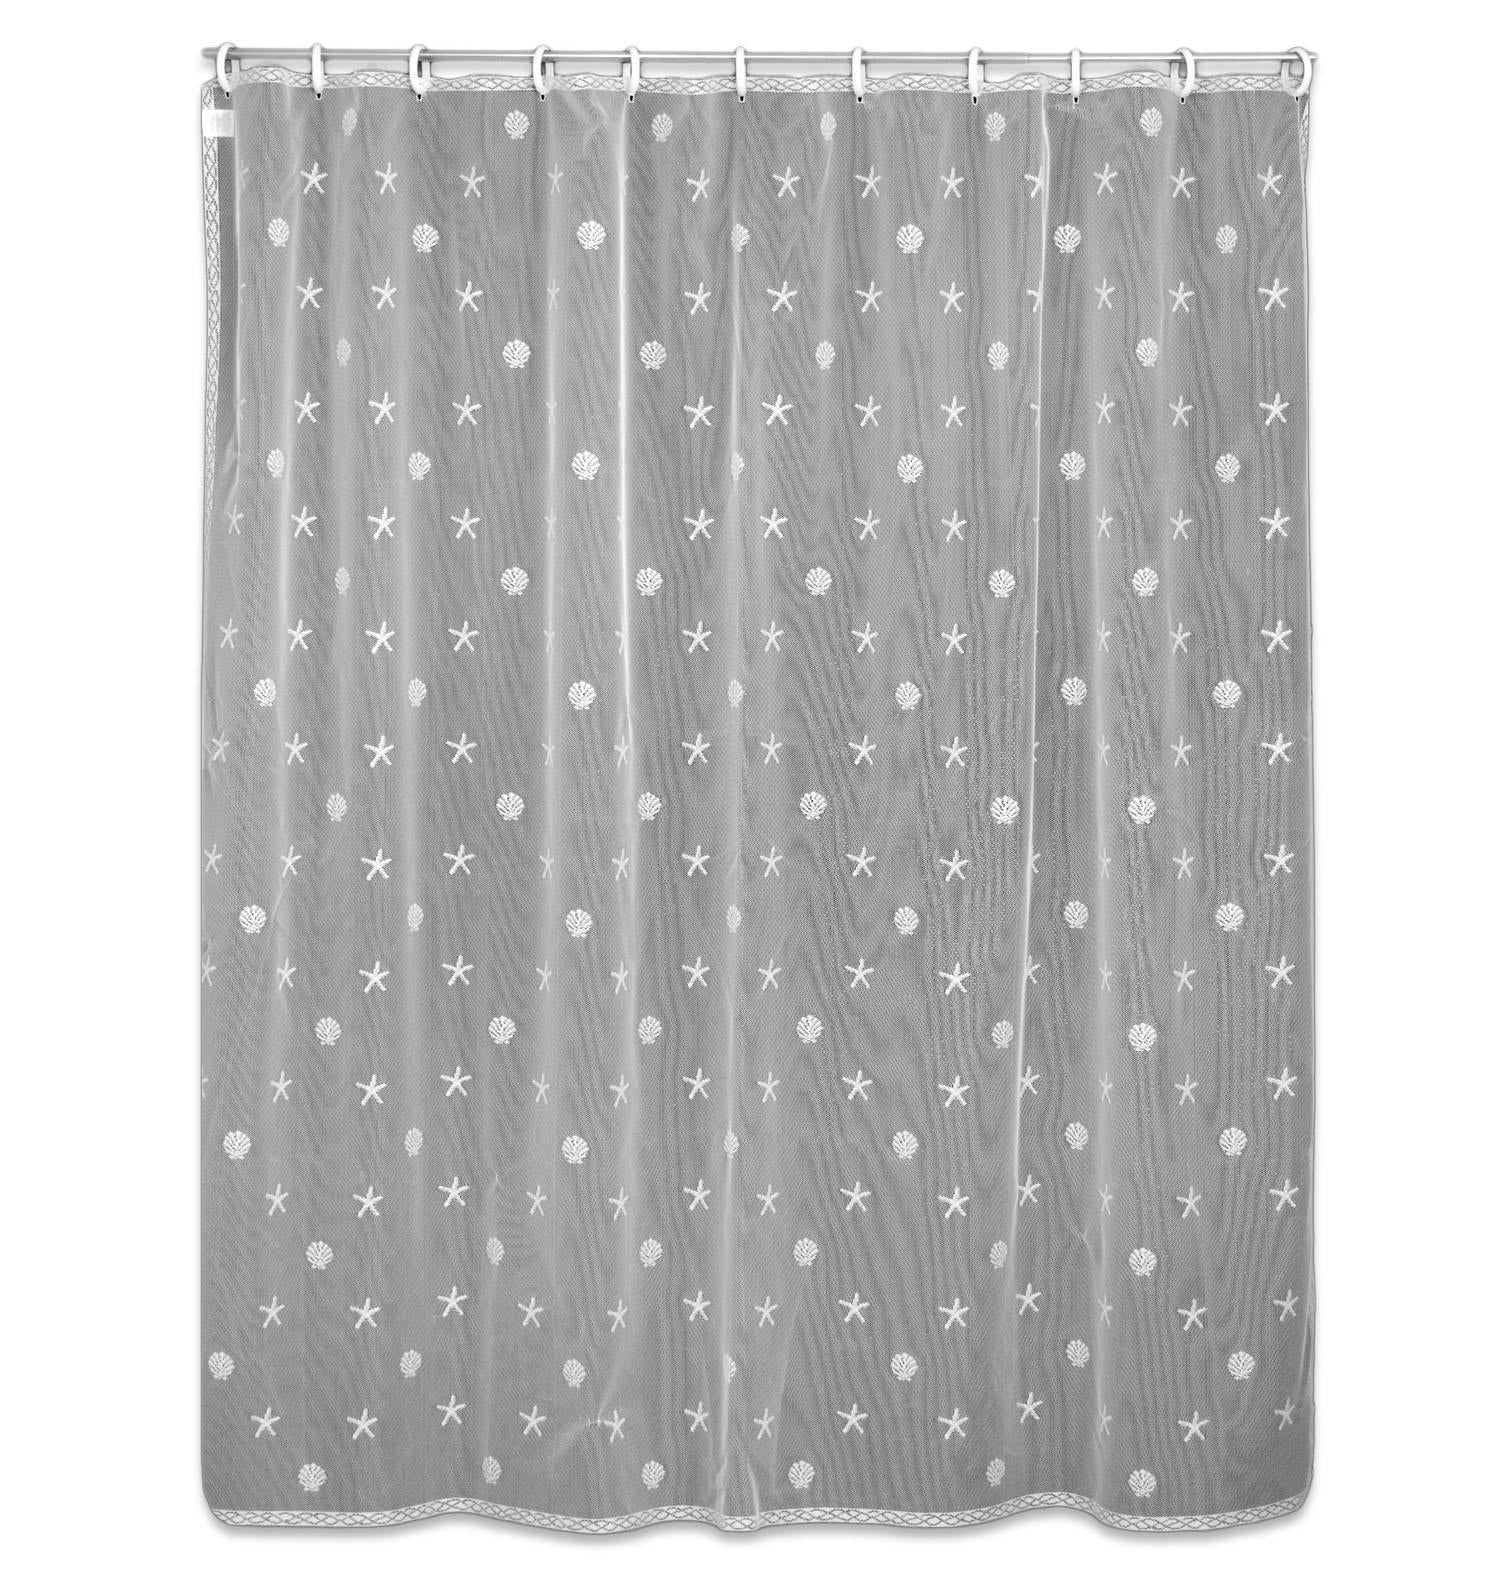 Heritage Lace Curtains | Sand Shell Shower Curtain